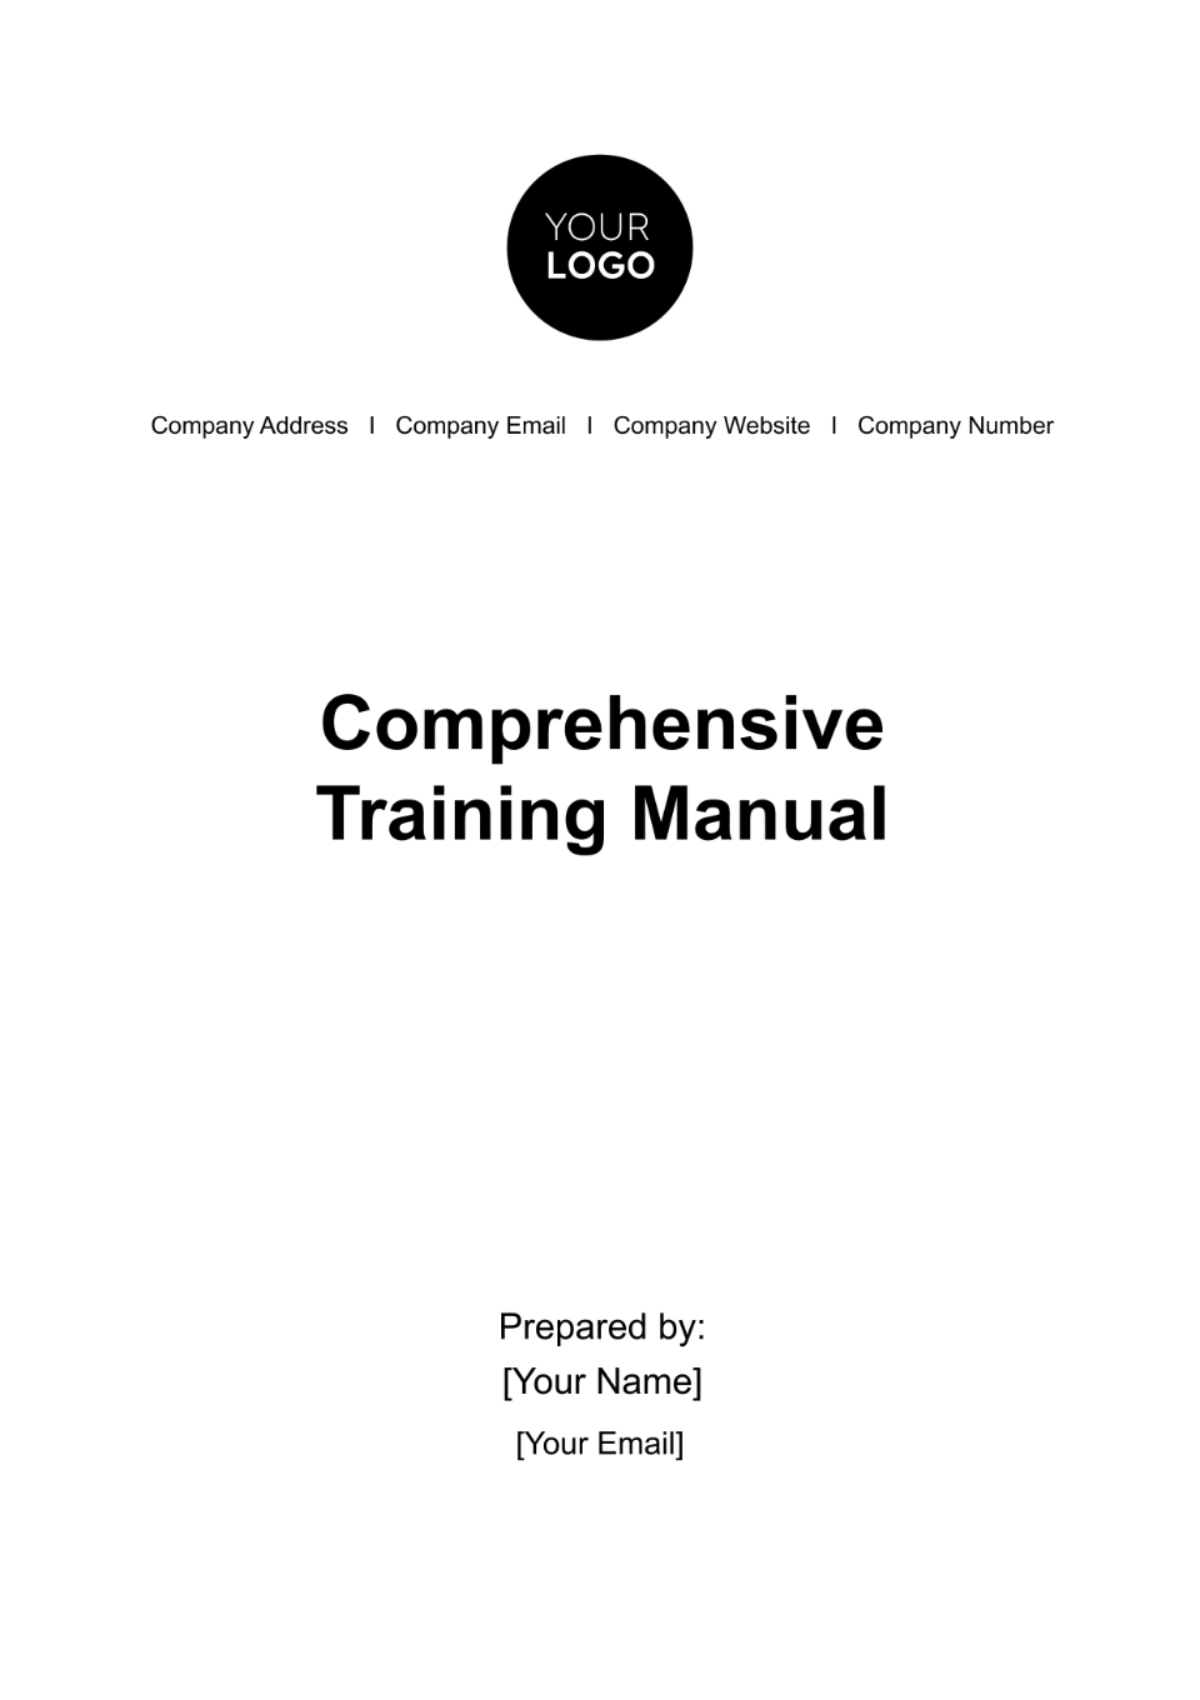 Free Comprehensive Training Manual HR Template